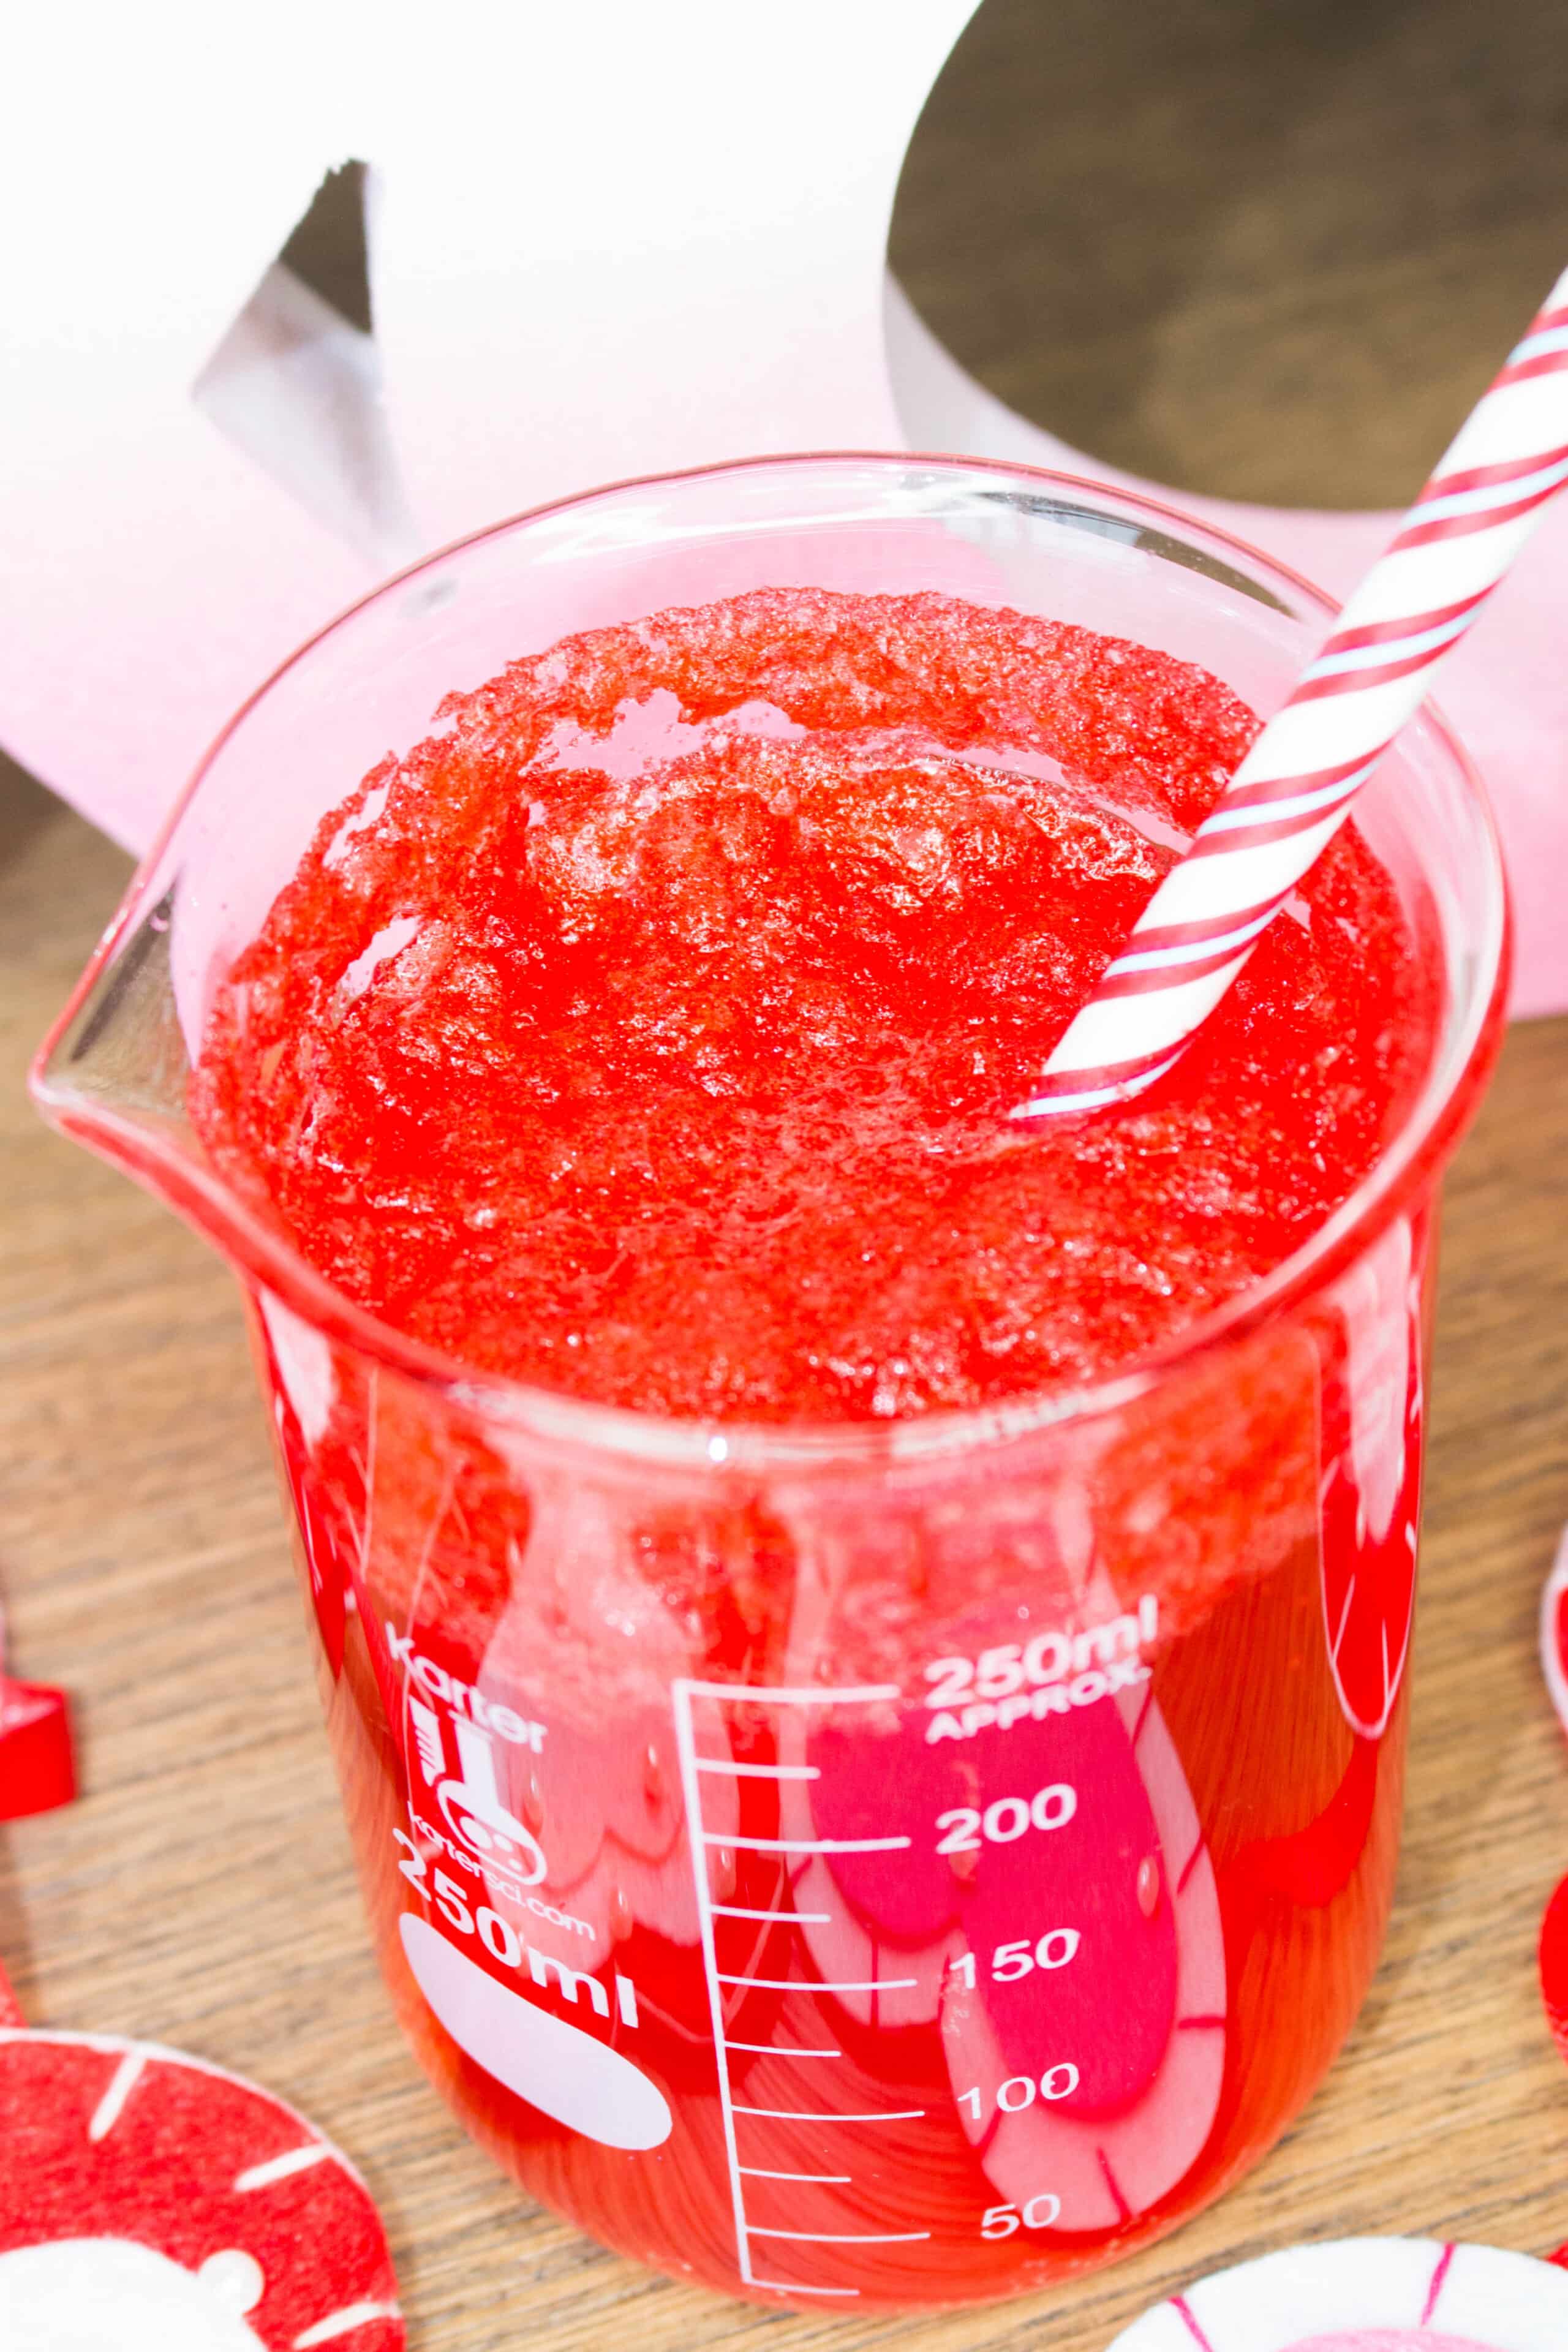 This no mess, four ingredient Poppin' Love Potion drink recipe is one of the best Valentine’s Day activities for kids! Watch this magic potion drink fizz and bubble when you add the secret ingredients! Includes a step-by-step video tutorial!